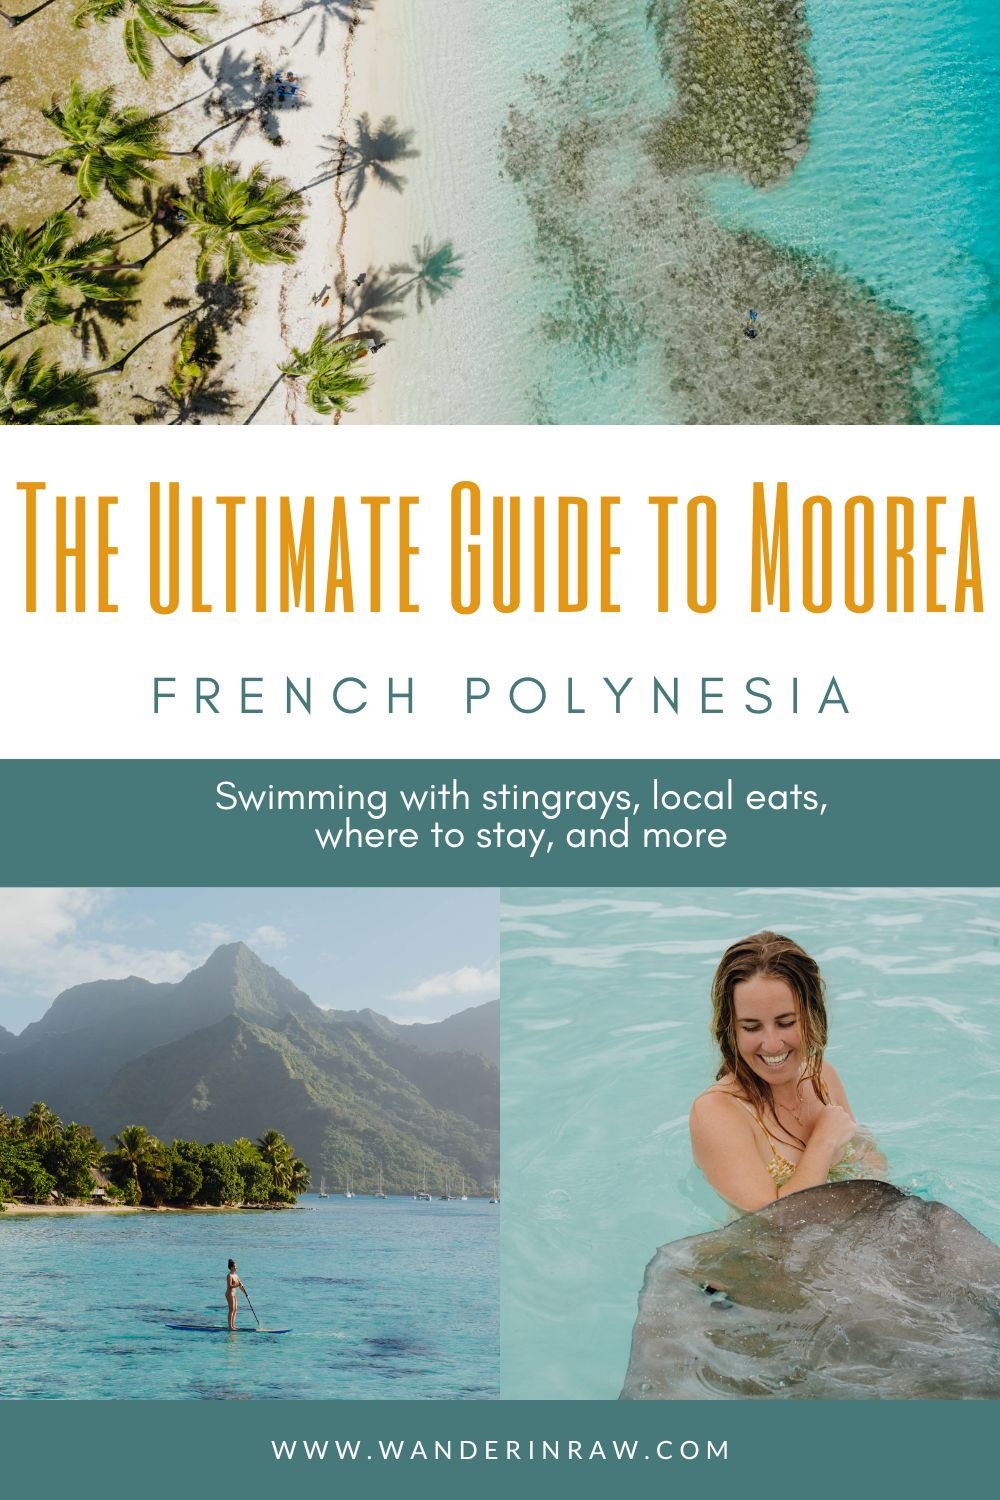 The Ultimate Guide to Moorea